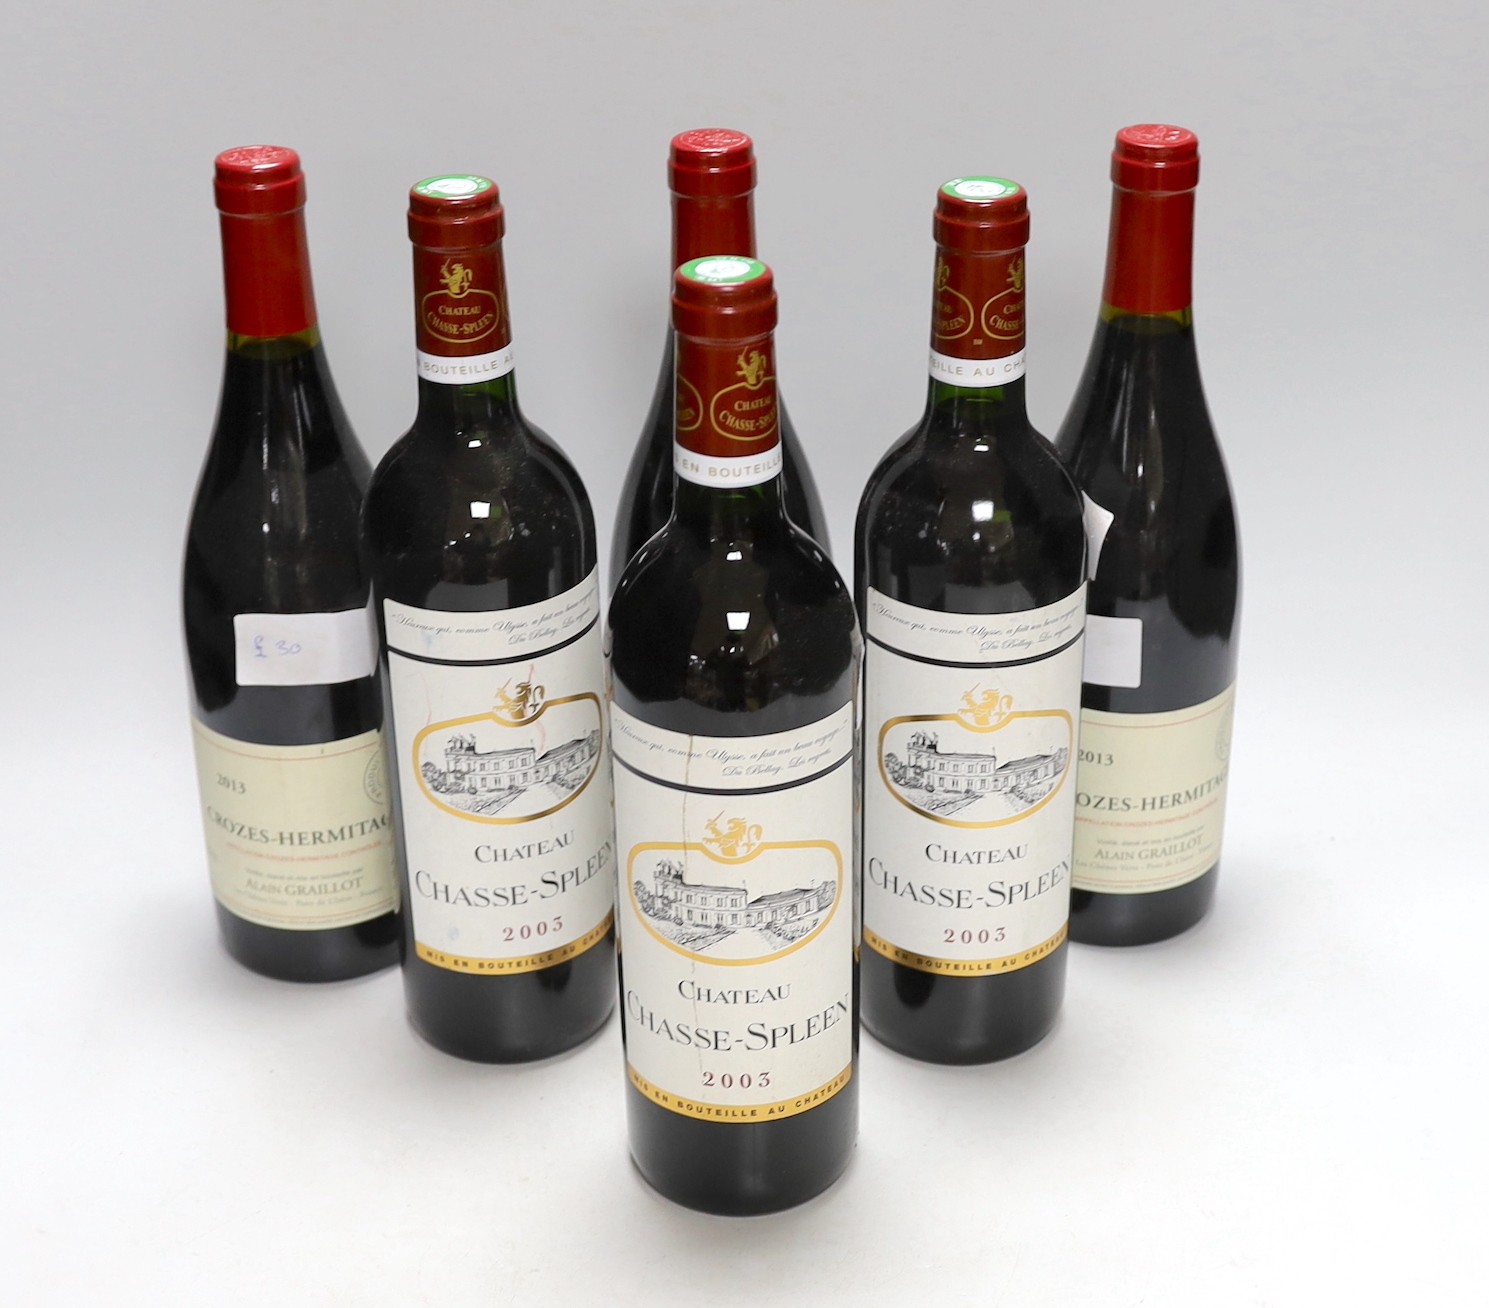 Three bottles of Crozes-Hermitage 2013 and three bottles of Chateau Chase-Spleen 2003                                                                                                                                       